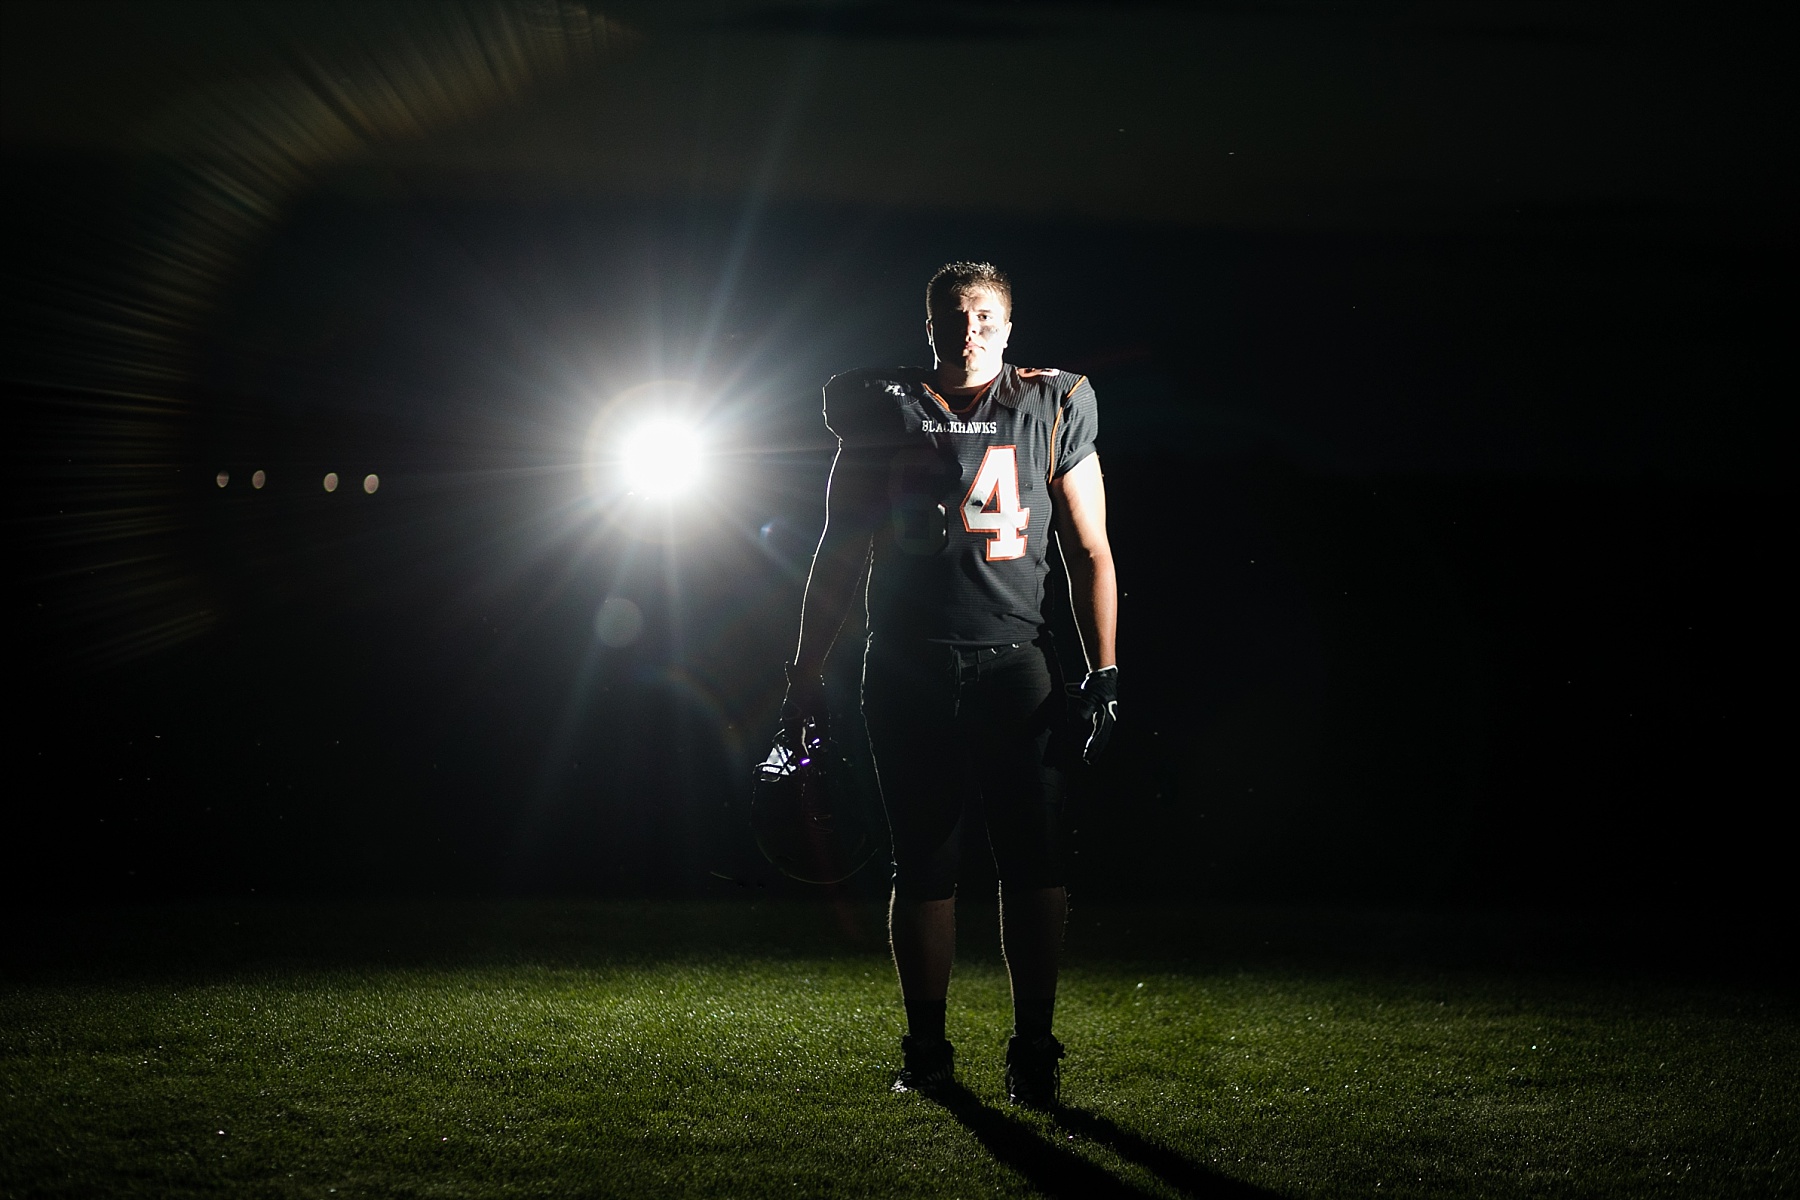 Payton's senior photos were filled with sports from basketball, track and discus to his true passion - football.